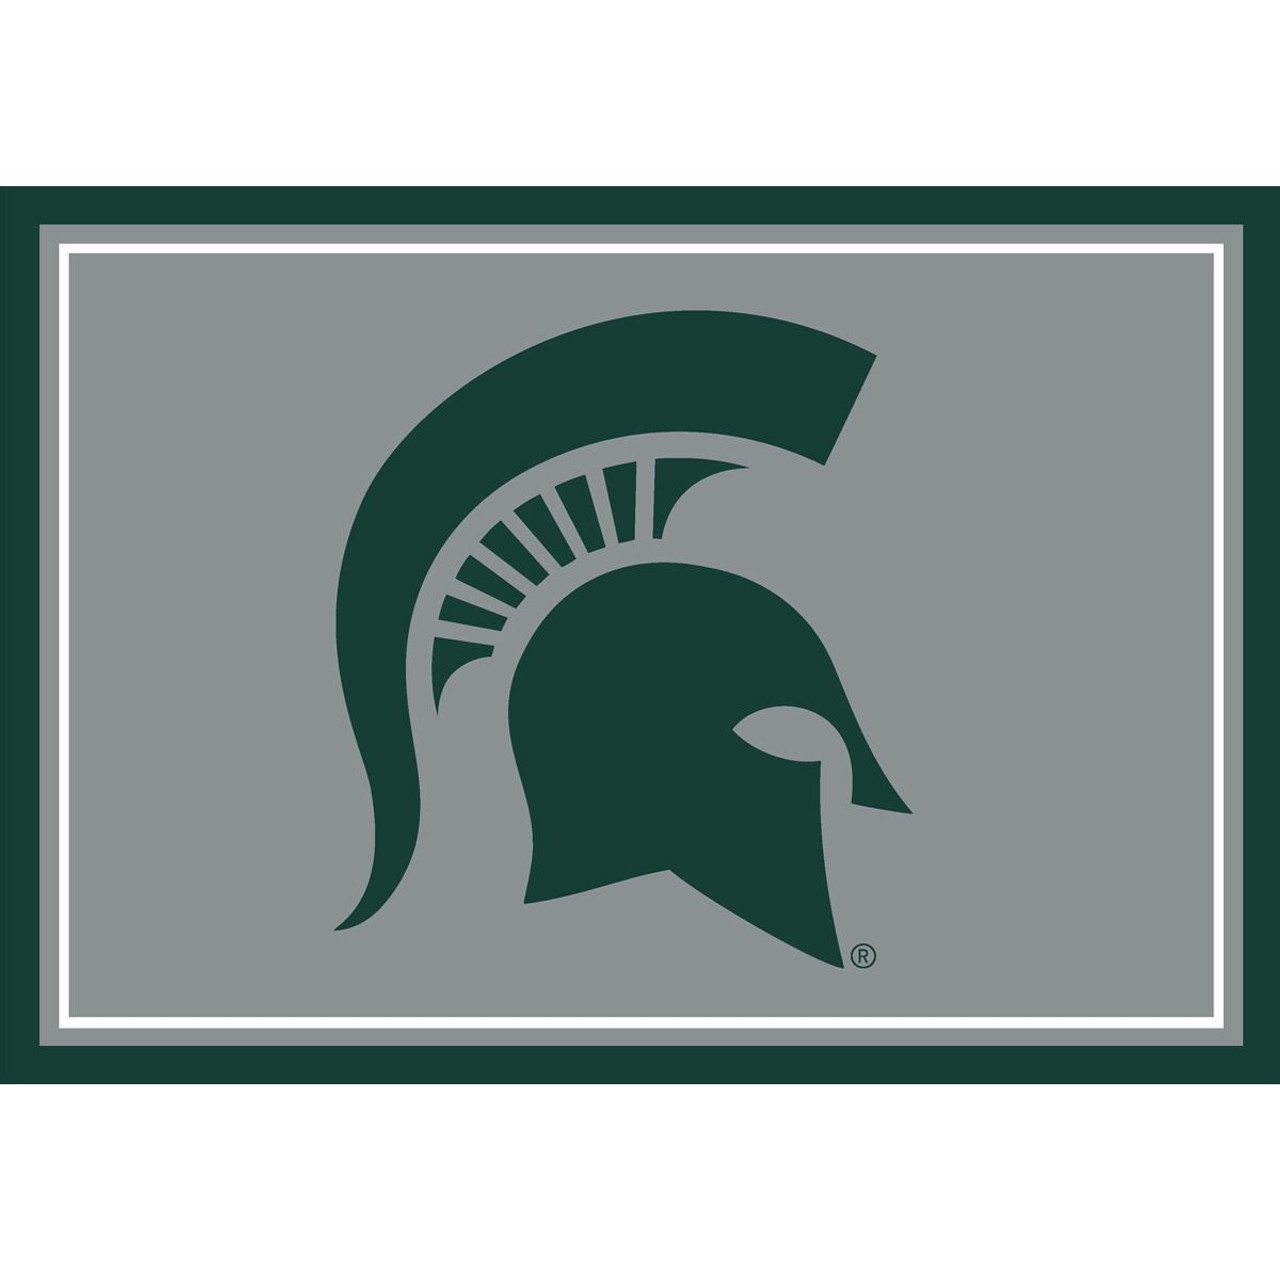 MI, Michigan, State, St, Spartans, 3x4, Entry, Rug, 569-3016, Imperial, NCAA, 720801131979